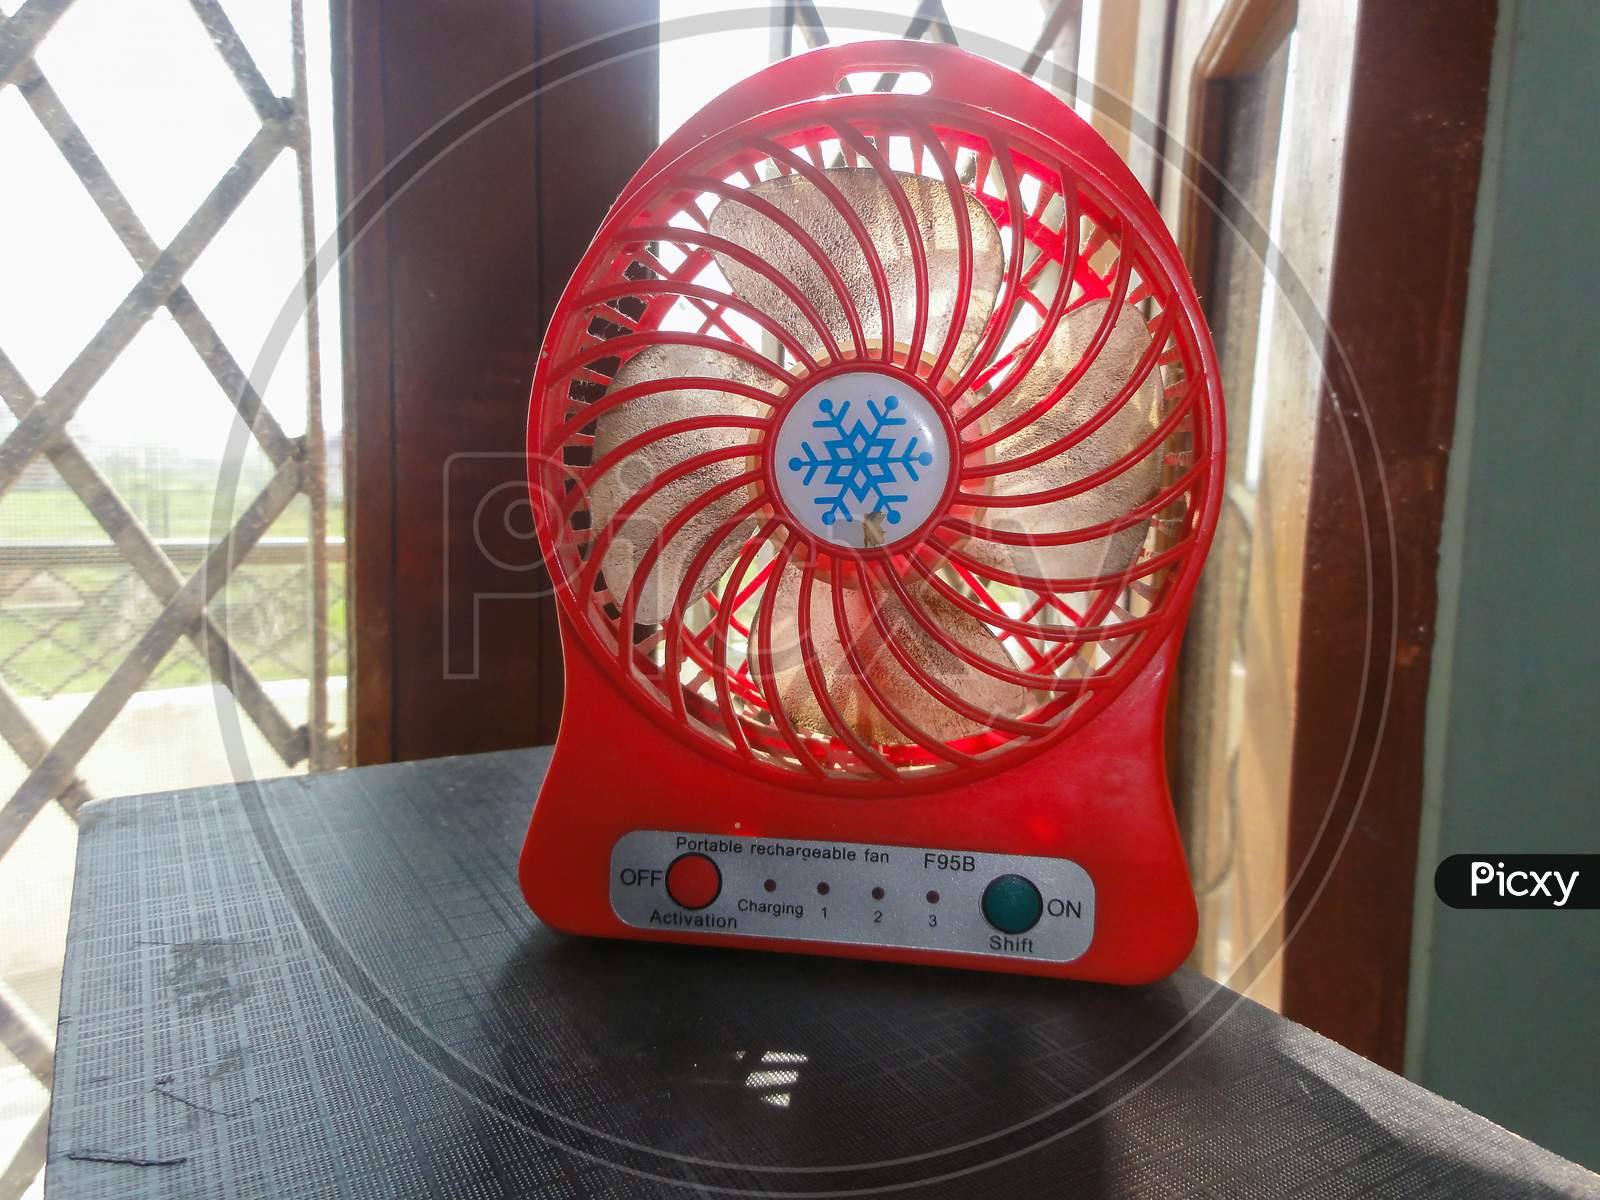 A Small Hand Fan At Home On The Table